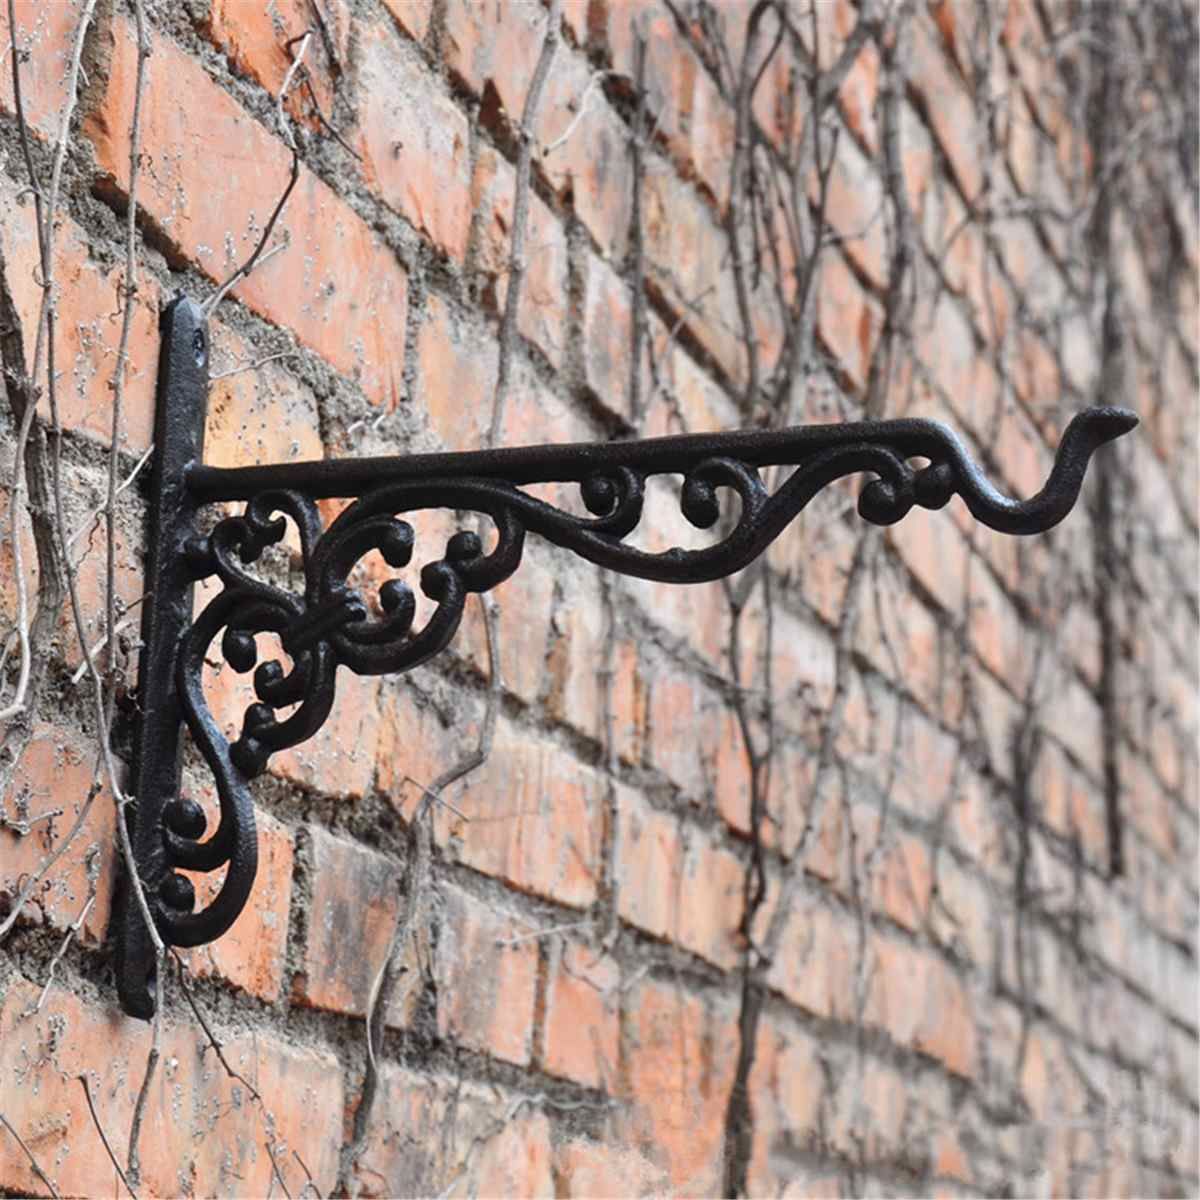 Farm Metal Wall Rack And 3 Tin Pot With Hanger Wall Decor Inside Latest 3 Cast Iron Hat Coat Keys Hook Antique Metal Rack Hanger For Hanging (View 9 of 20)